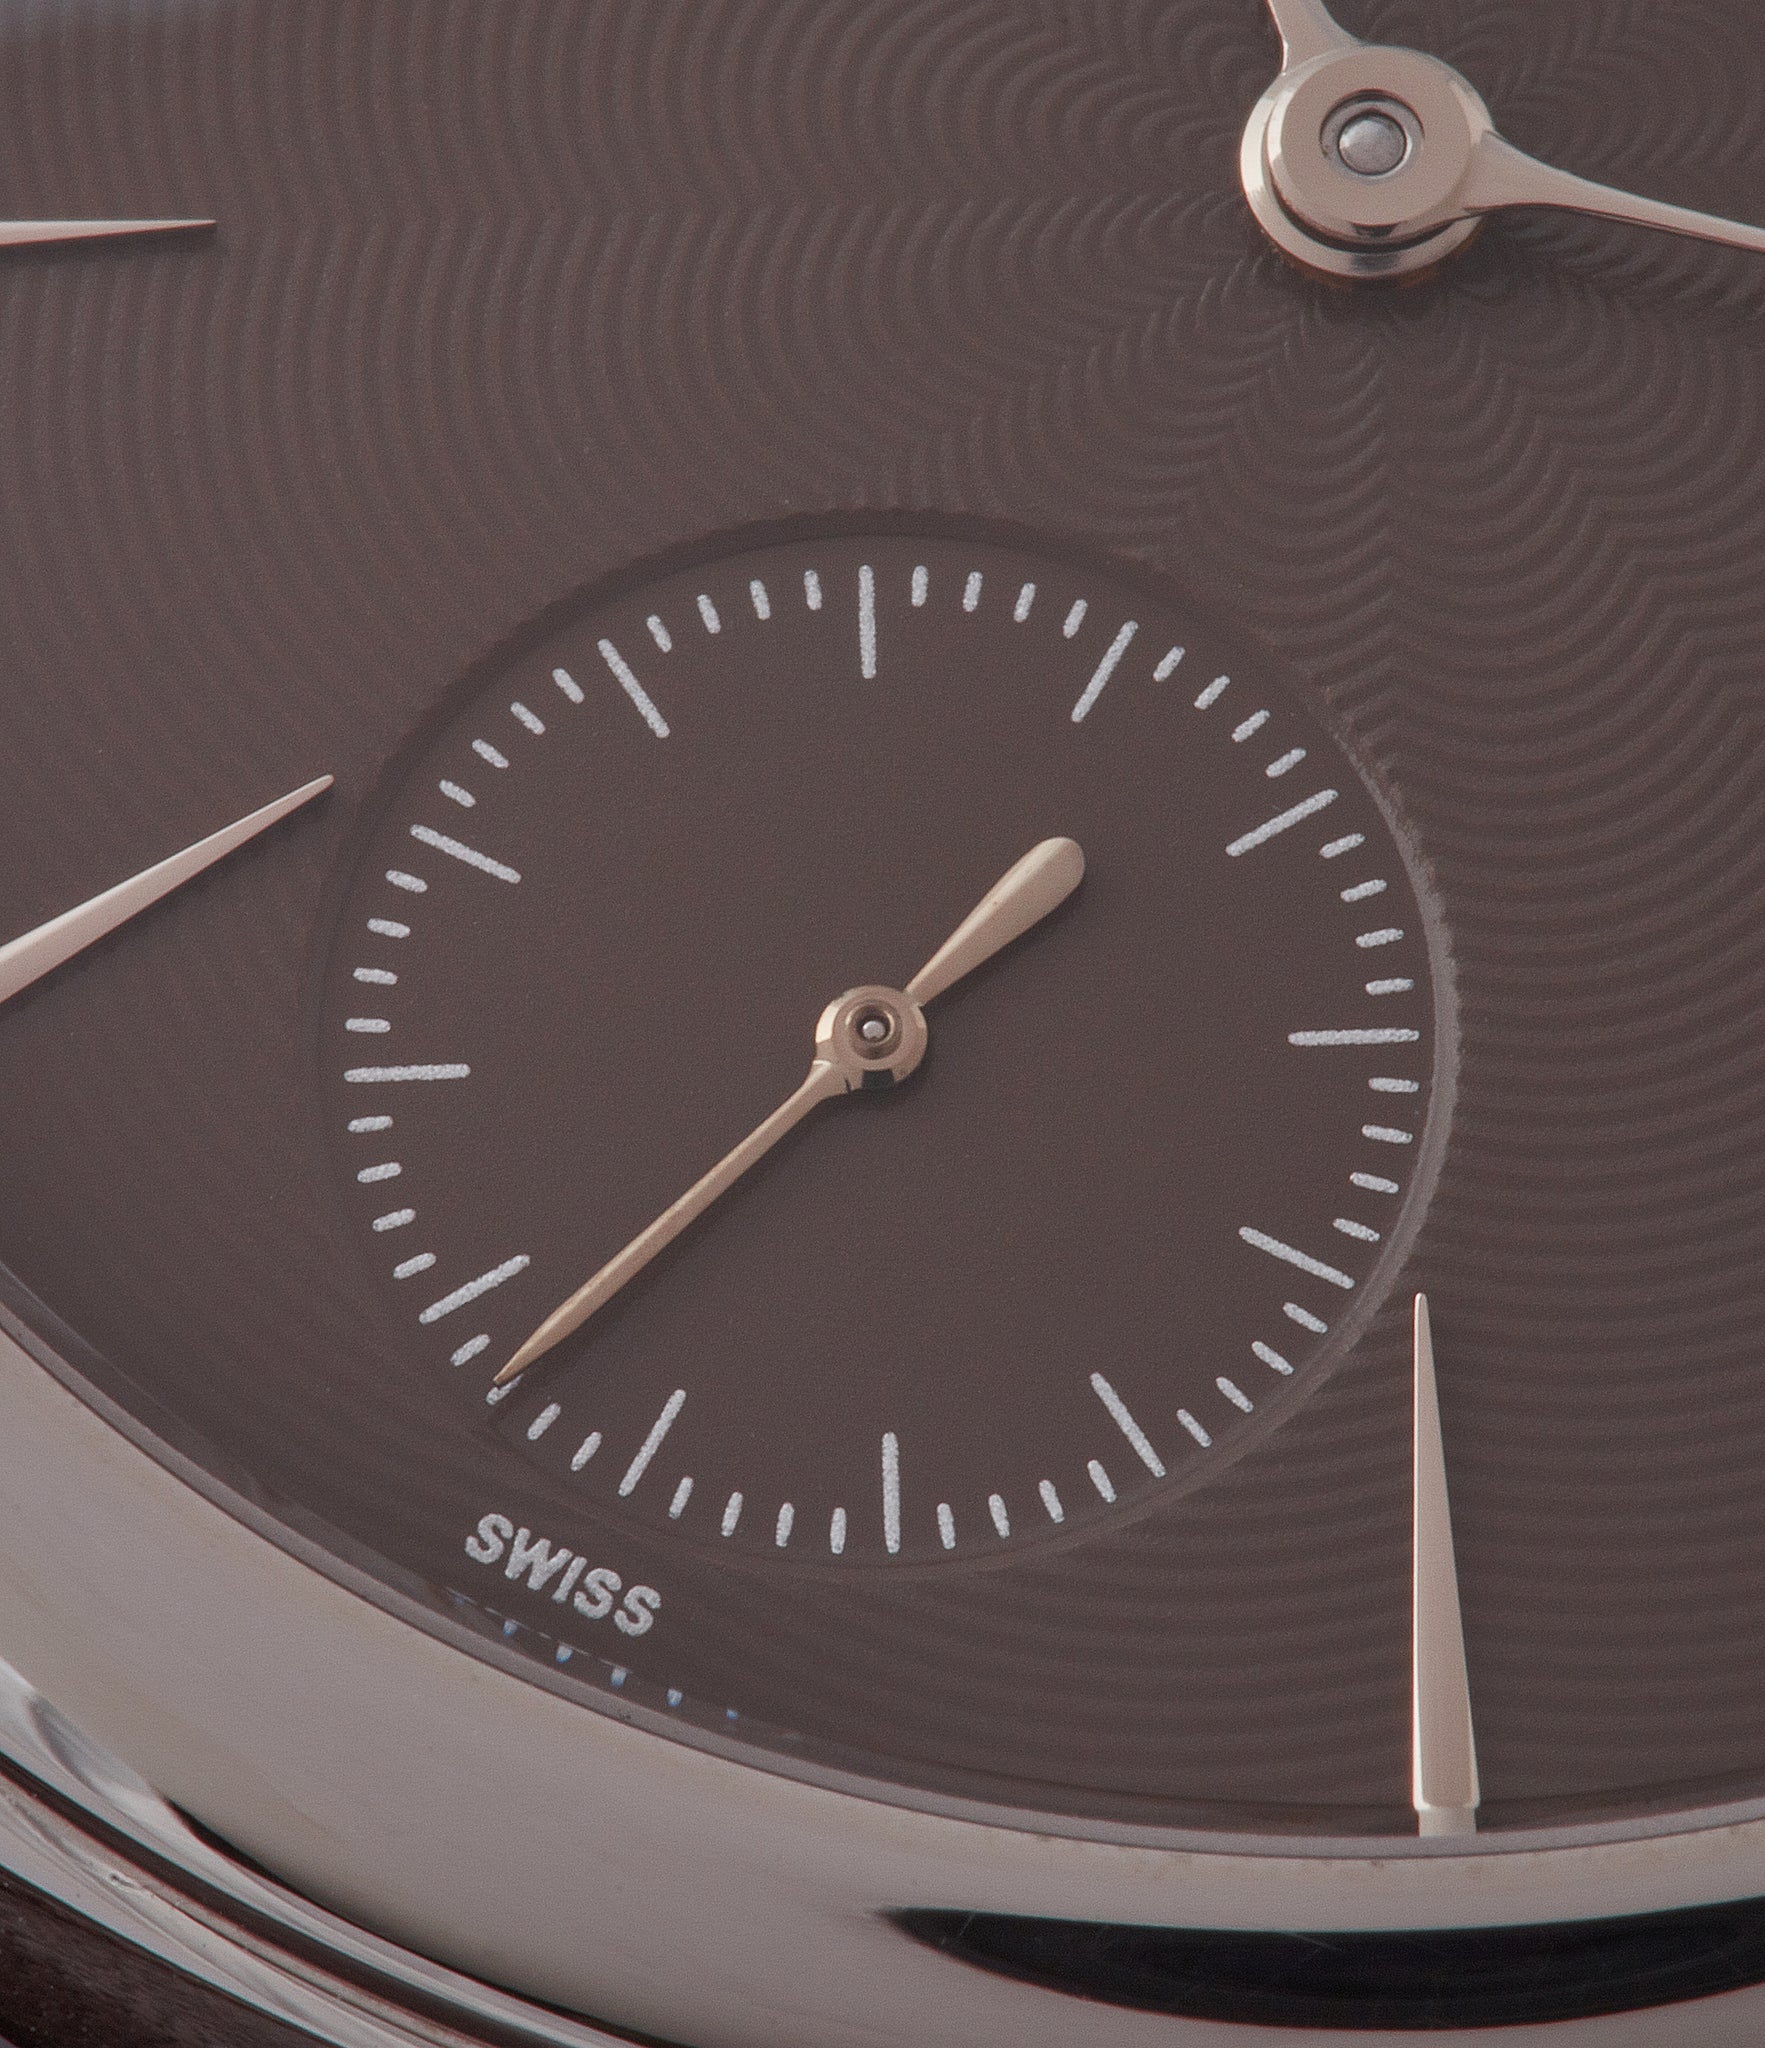 brown dial Laurent Ferrier Prototype Galet Micro-rotor LF 229.01 "Only Watch 2011" steel watch for sale online at A Collected Man London UK approved seller of independent watchmakers